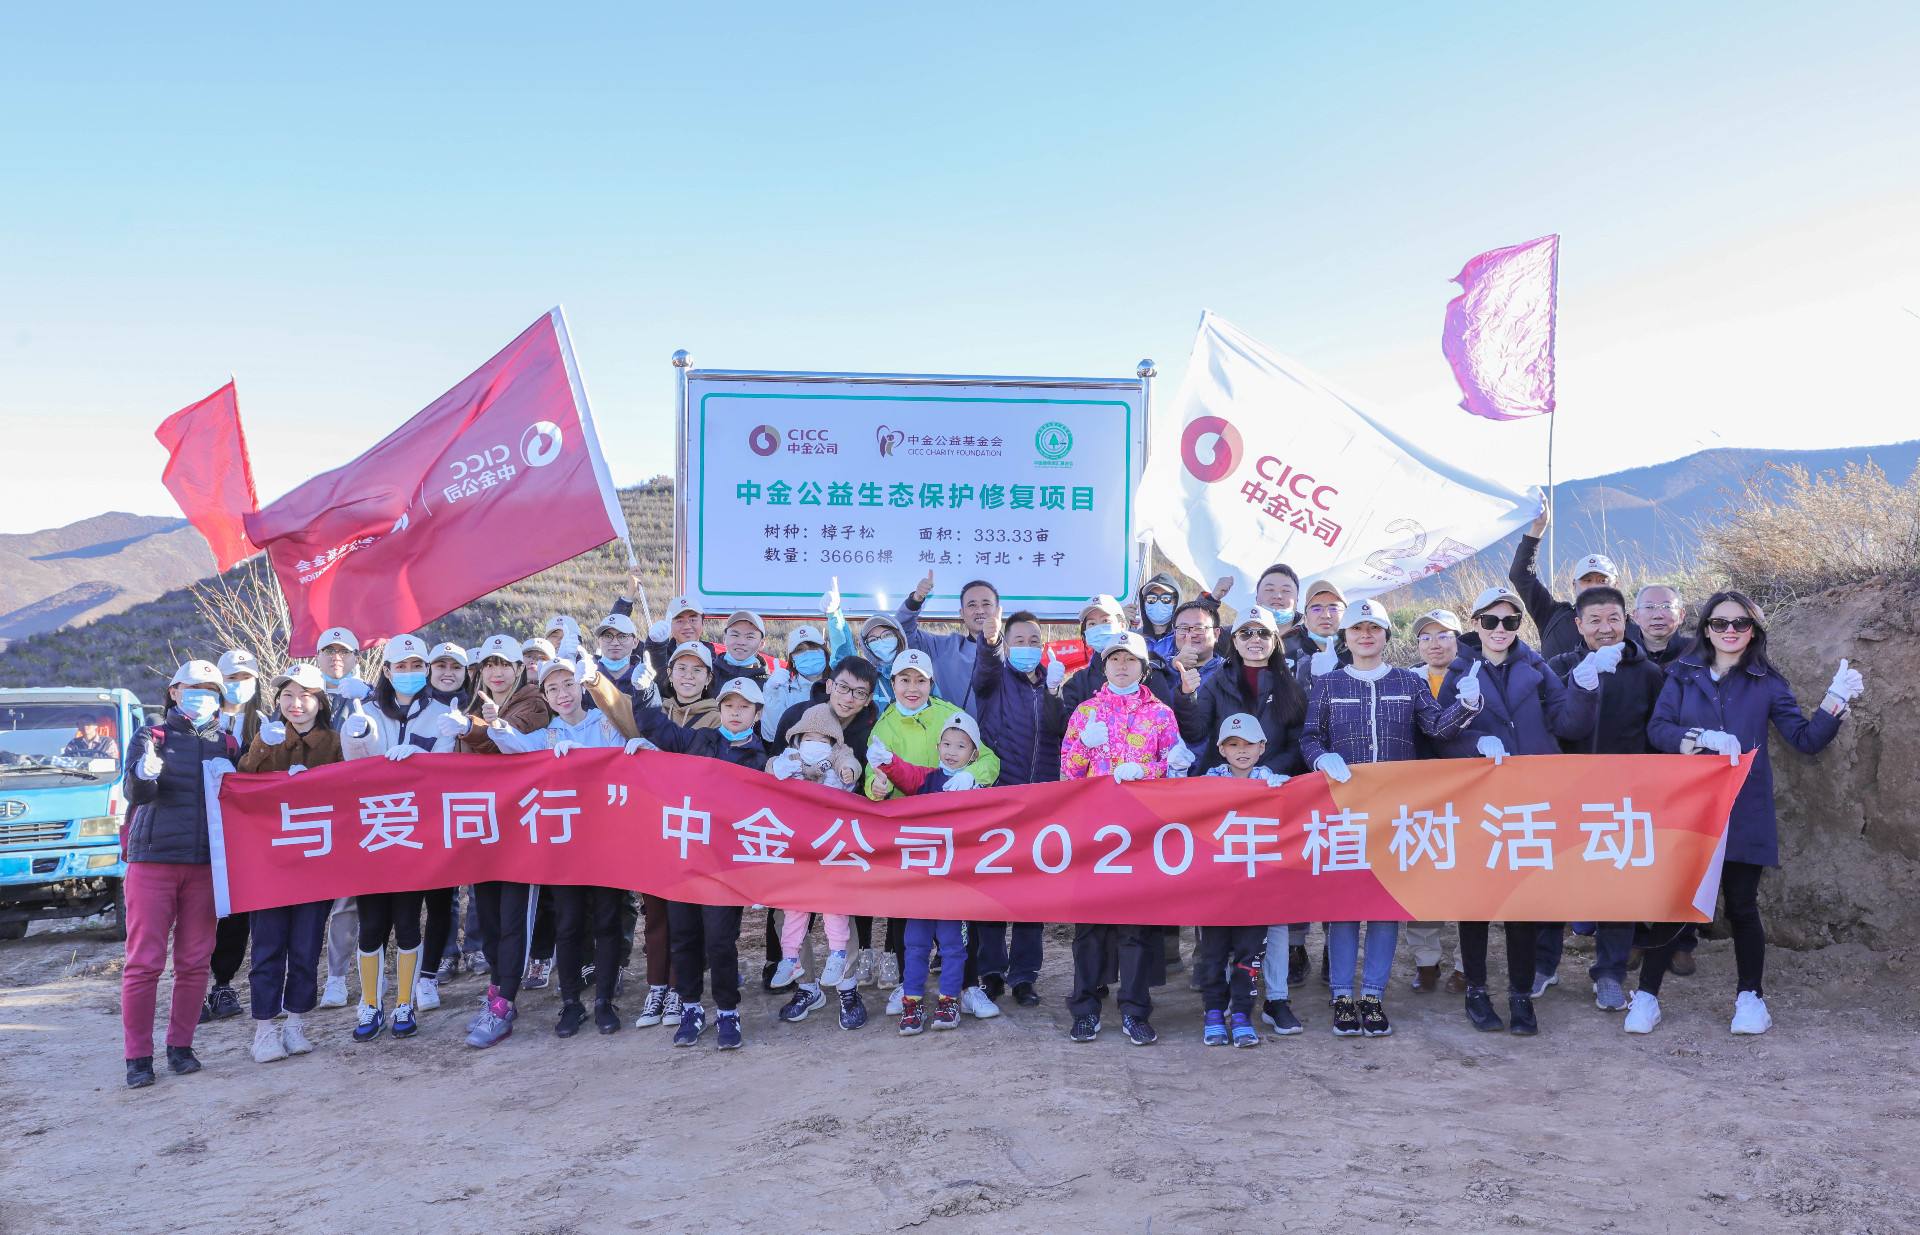 8. Public Welfare Ecological Protection and Restoration Project (Fengning Manchu Autonomous County, Hebei Province)